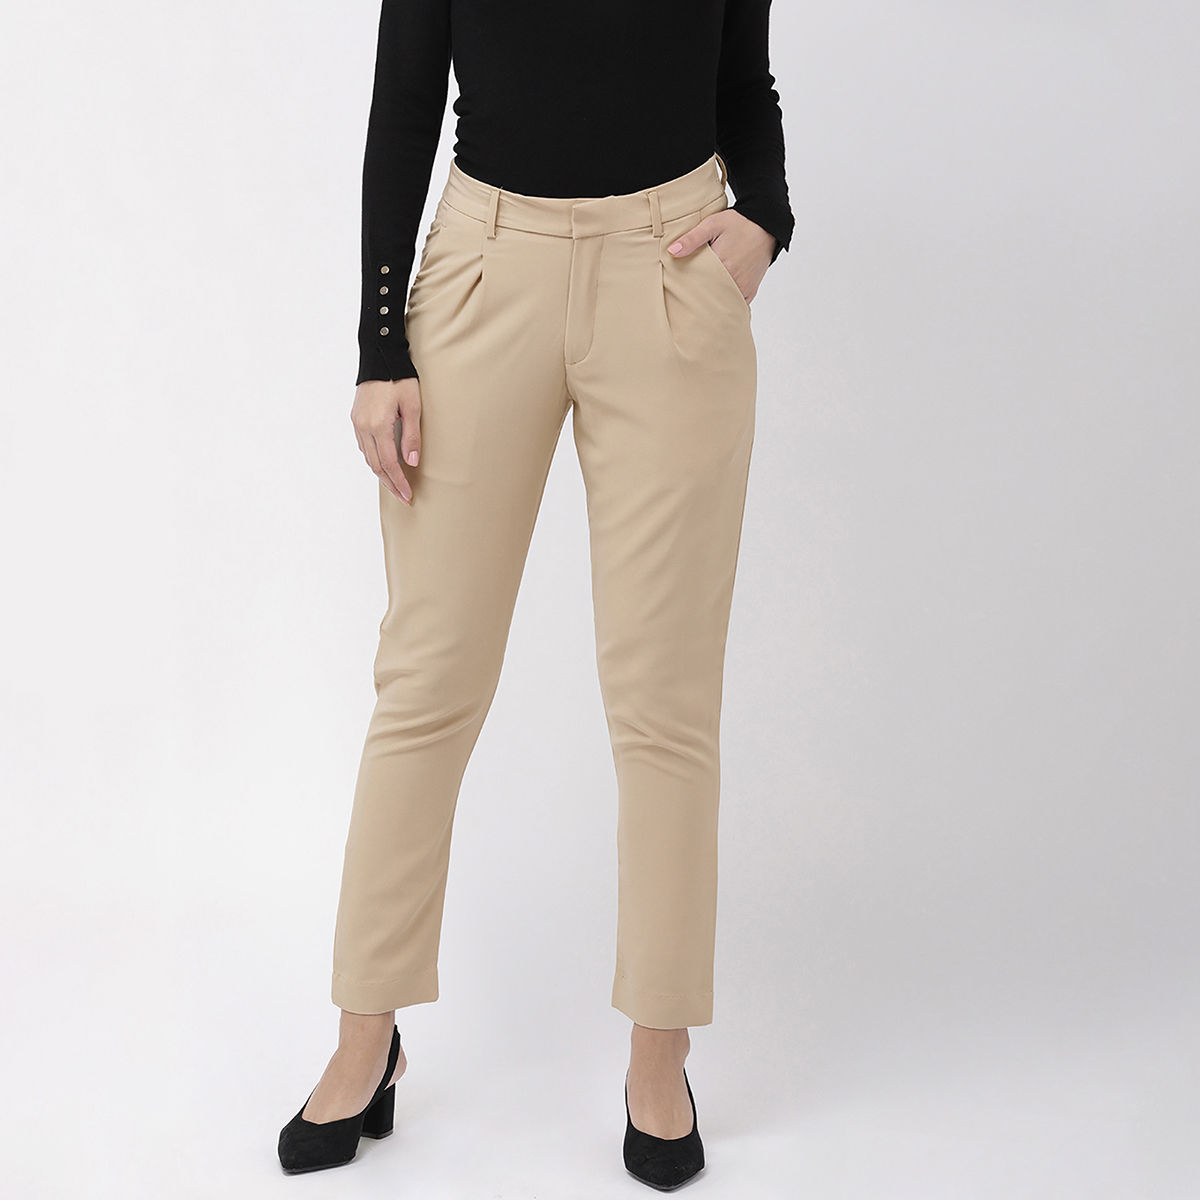 Buy FRATINI Womens 2 Pocket Formal Trousers  Shoppers Stop